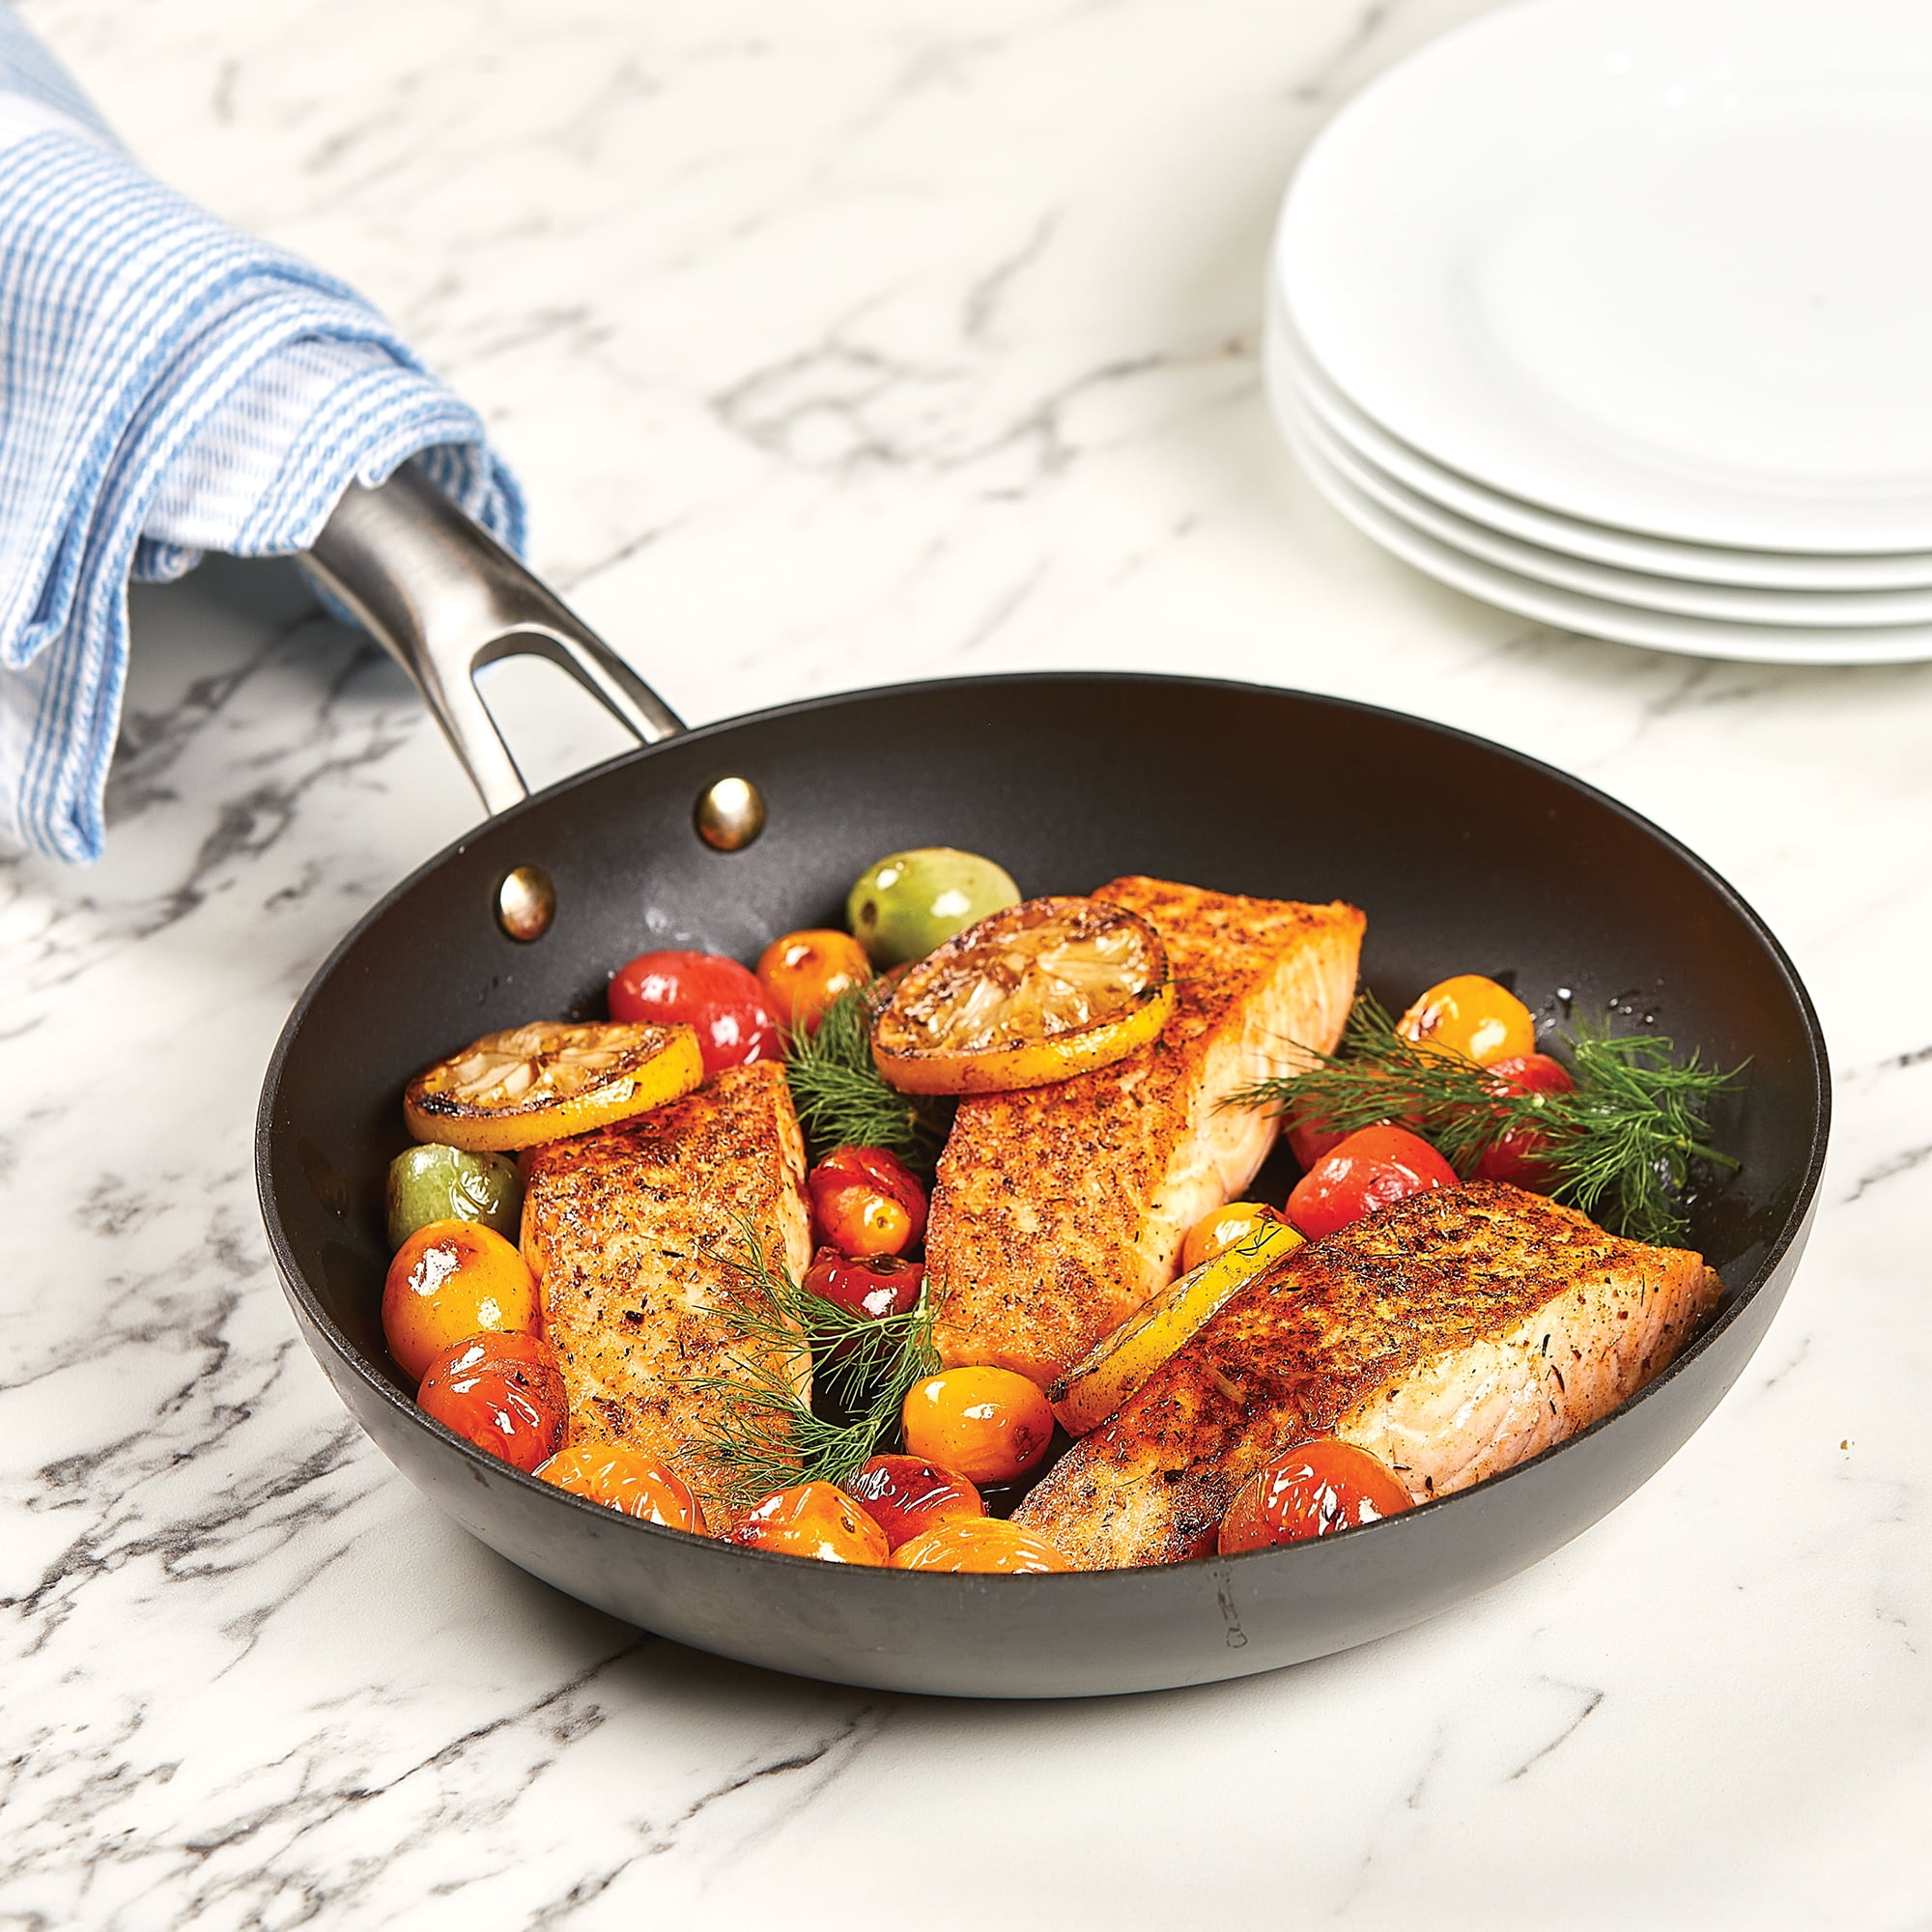 Emeril Lagasse - Looking for a new cookware set? Don't miss this great deal  on my 10 Piece Hard Anodized Set. QVC Shop here:  CookwareSet